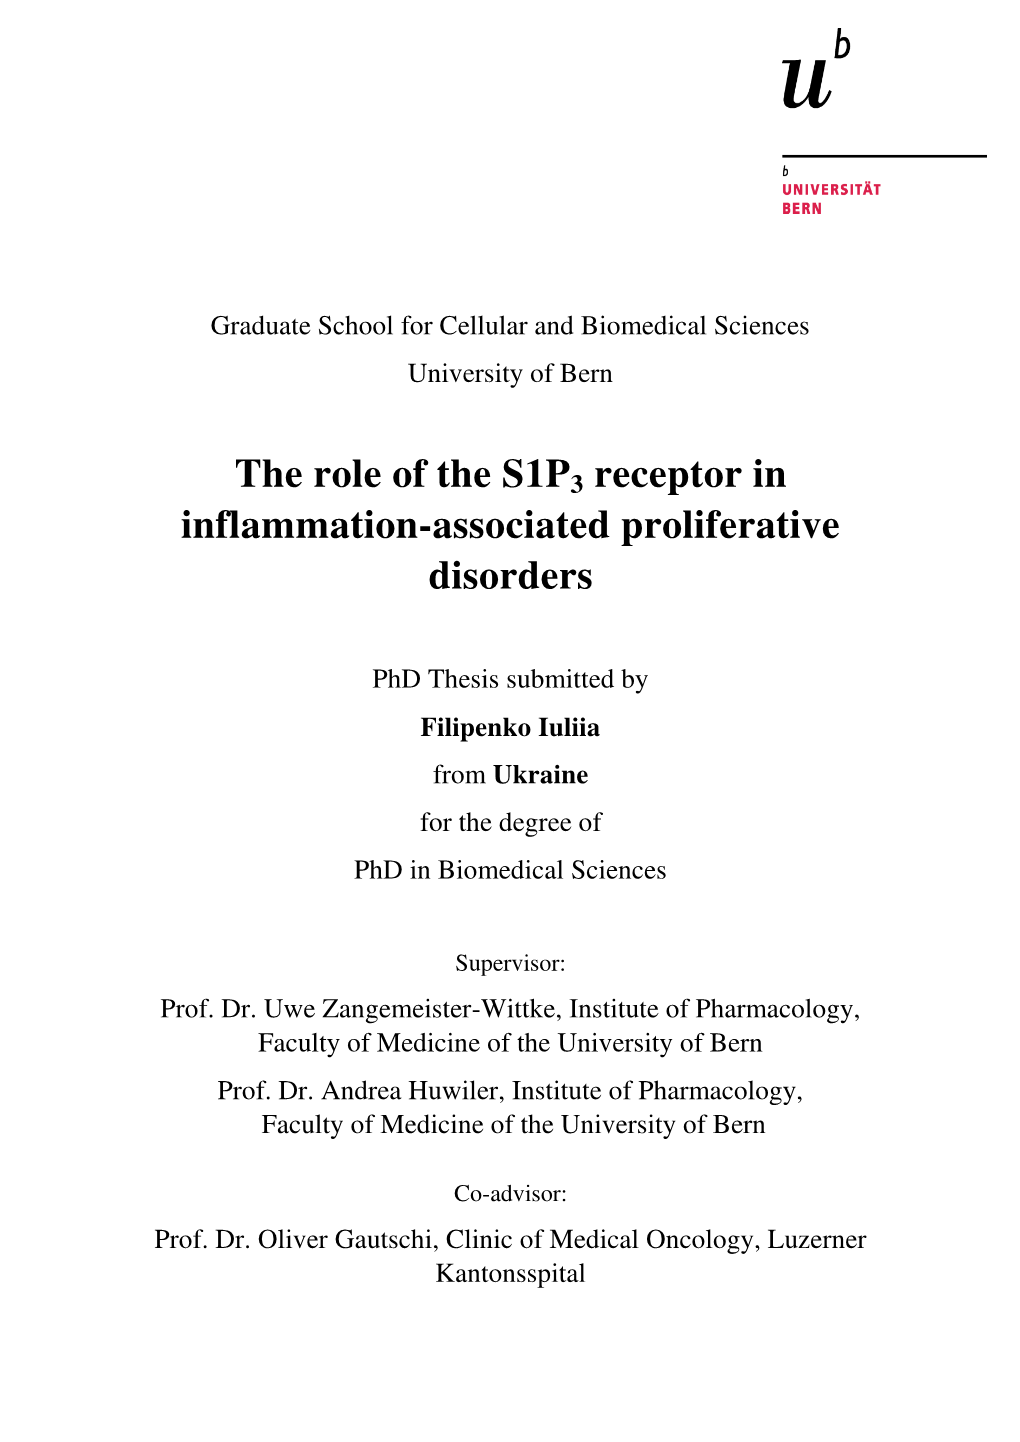 The Role of the S1P3 Receptor in Inflammation-Associated Proliferative Disorders